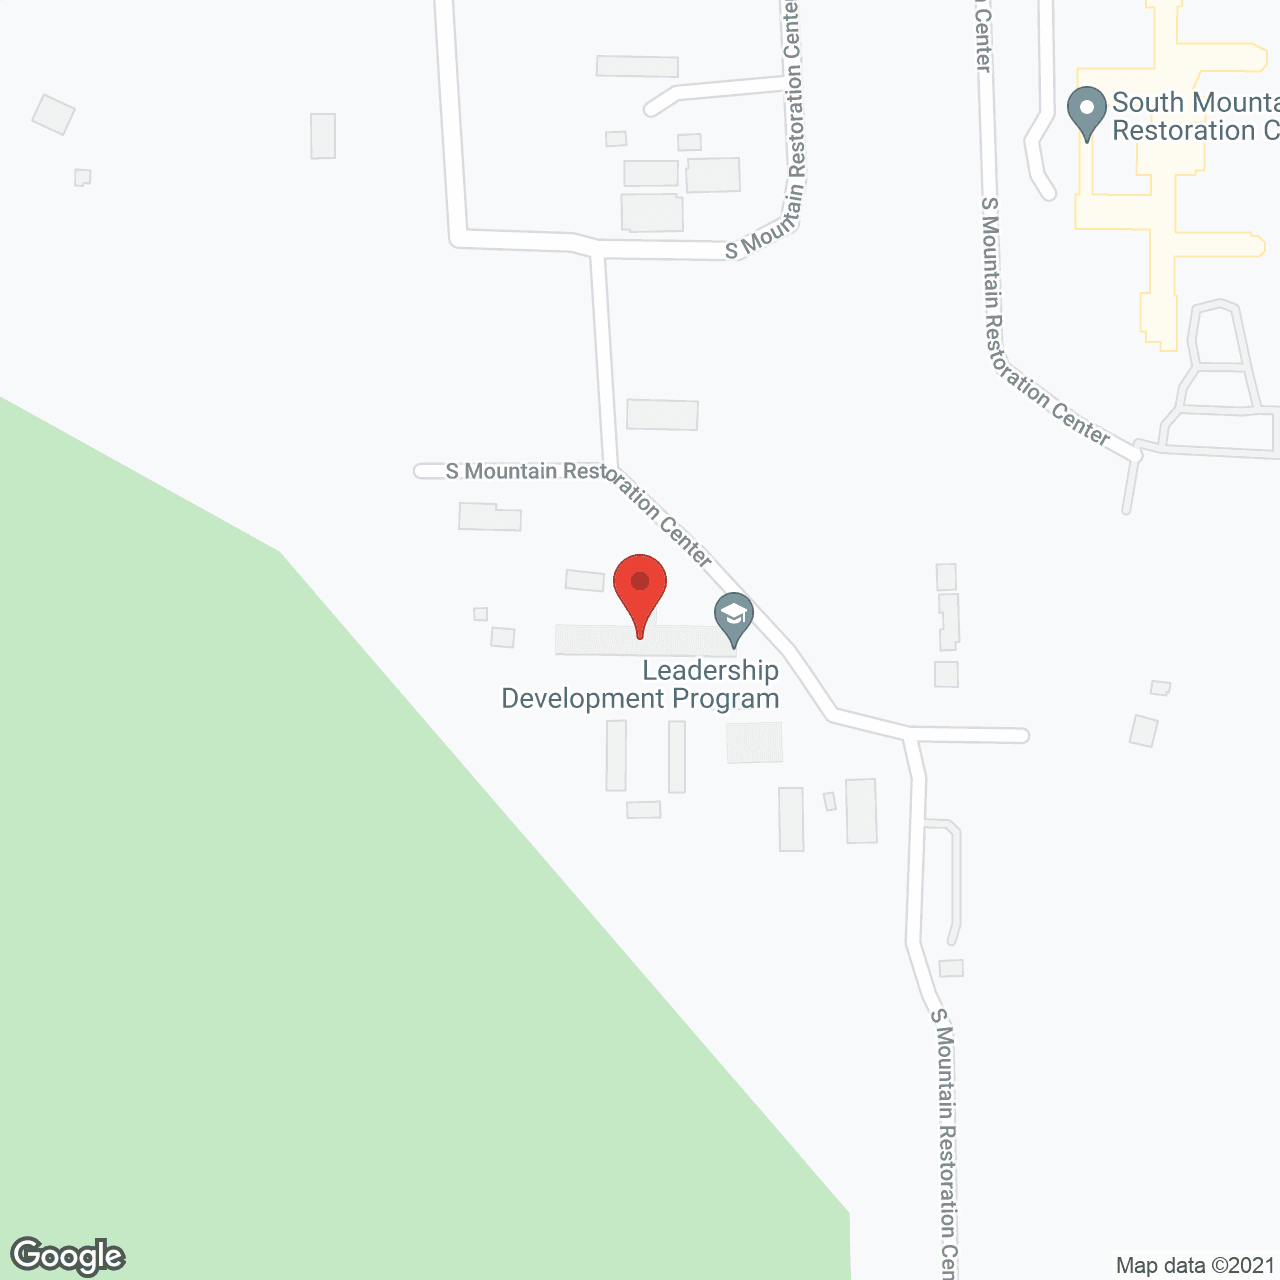 South Mountain Restoration Ctr in google map